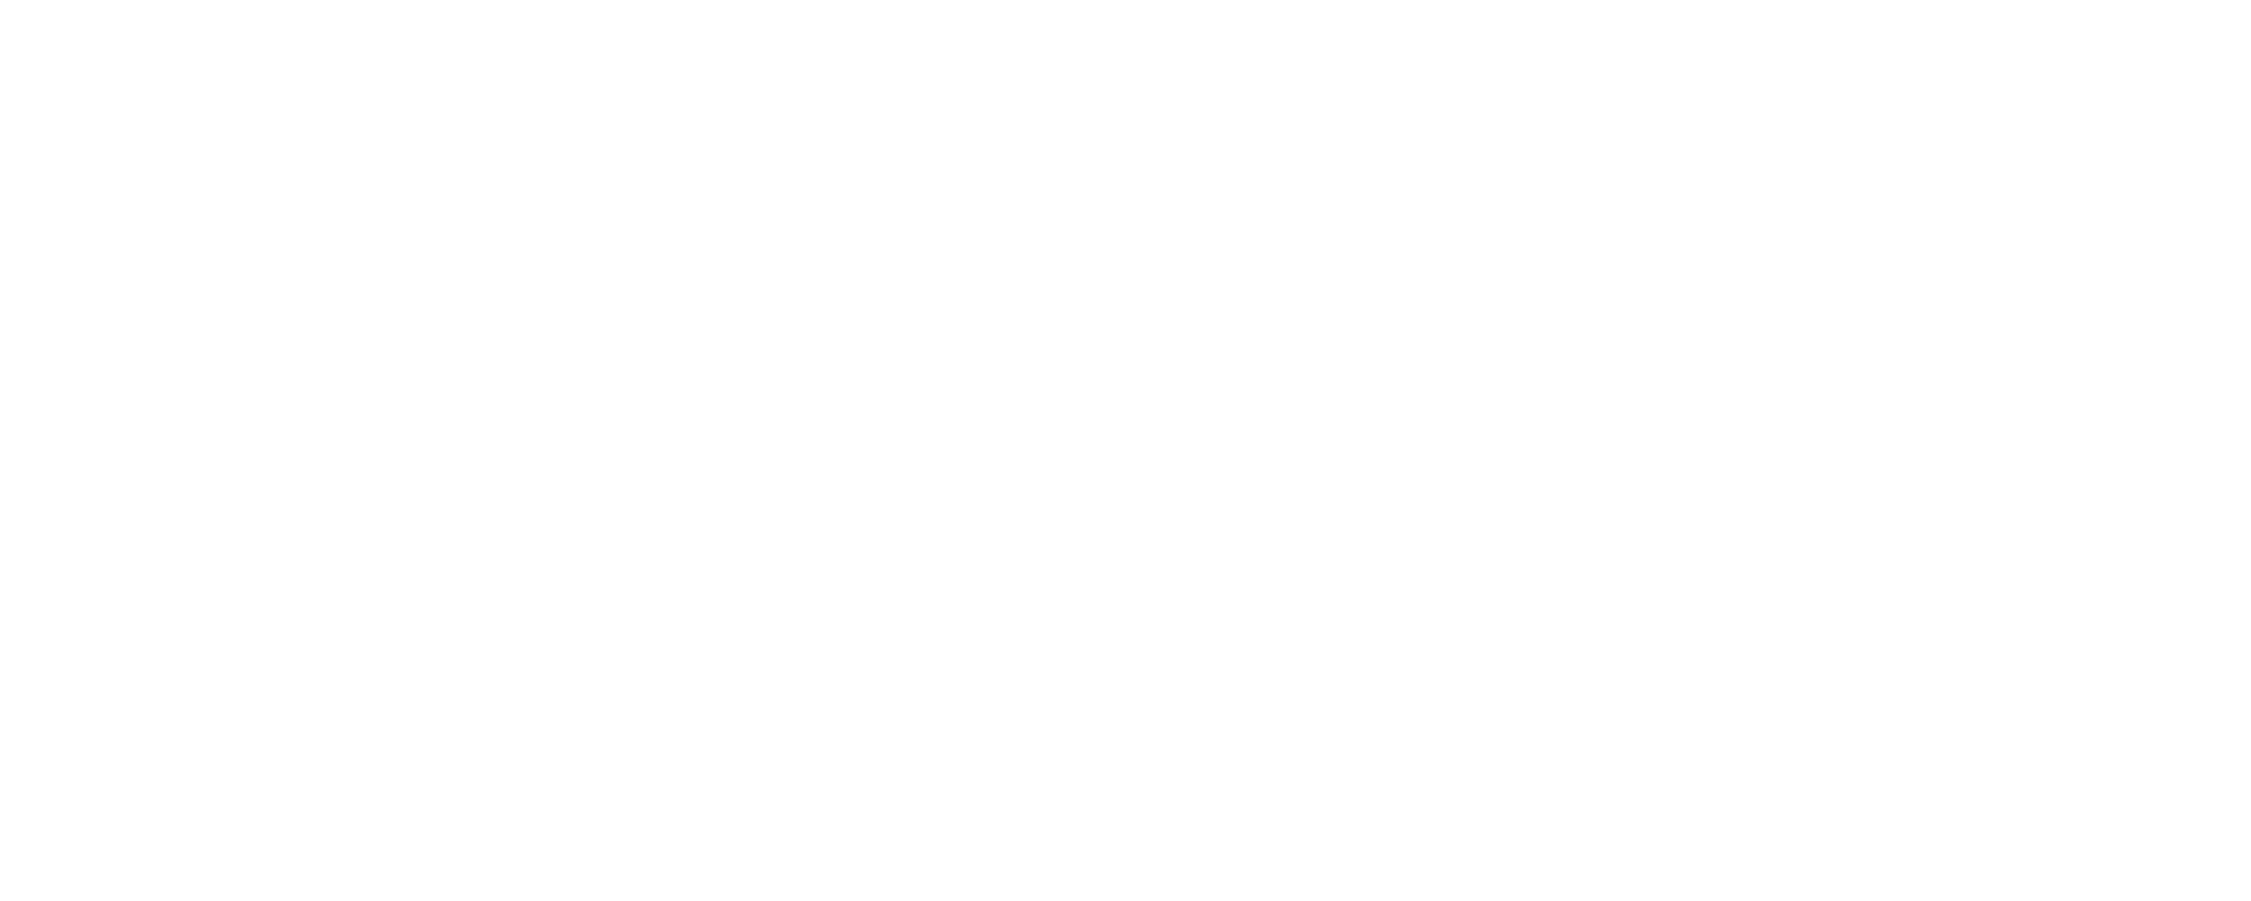 Chris Scherer For Pinellas County Commission